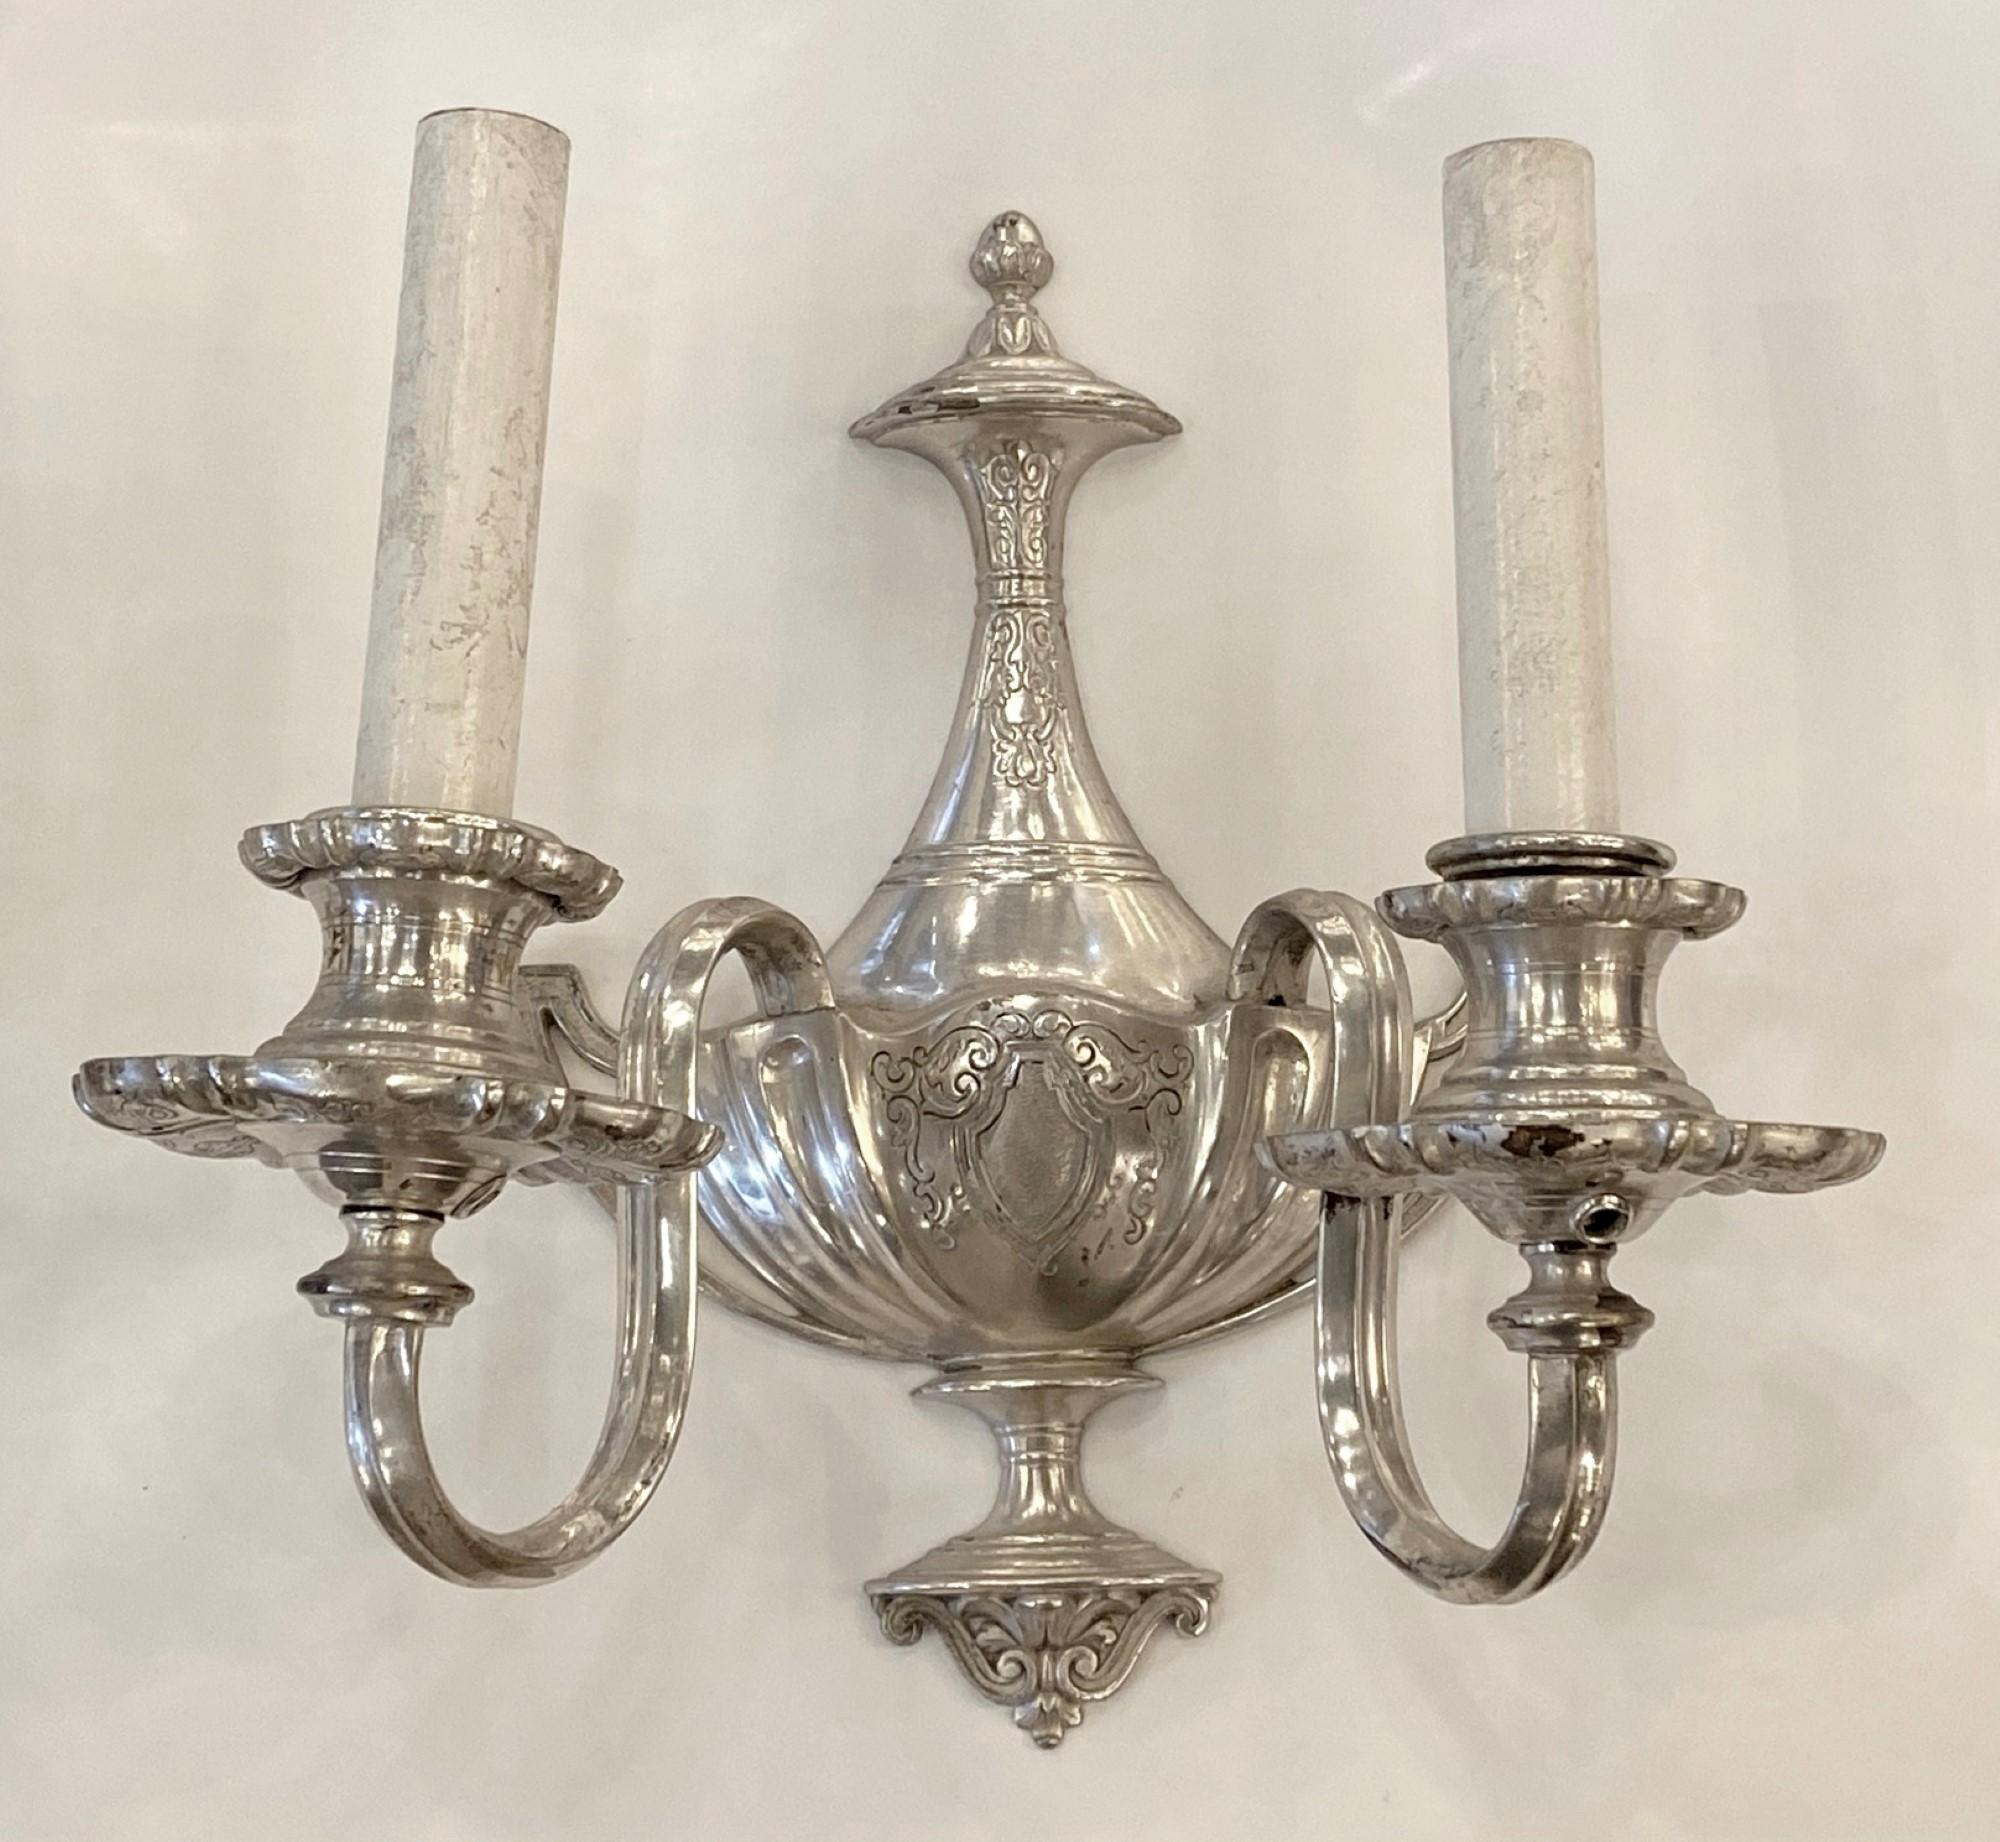 Cast brass two arm sconces with silver plating. Priced as a pair. Cleaned and rewired. Early 20th century done in a Victorian style. Please note, this item is located in one of our NYC locations.